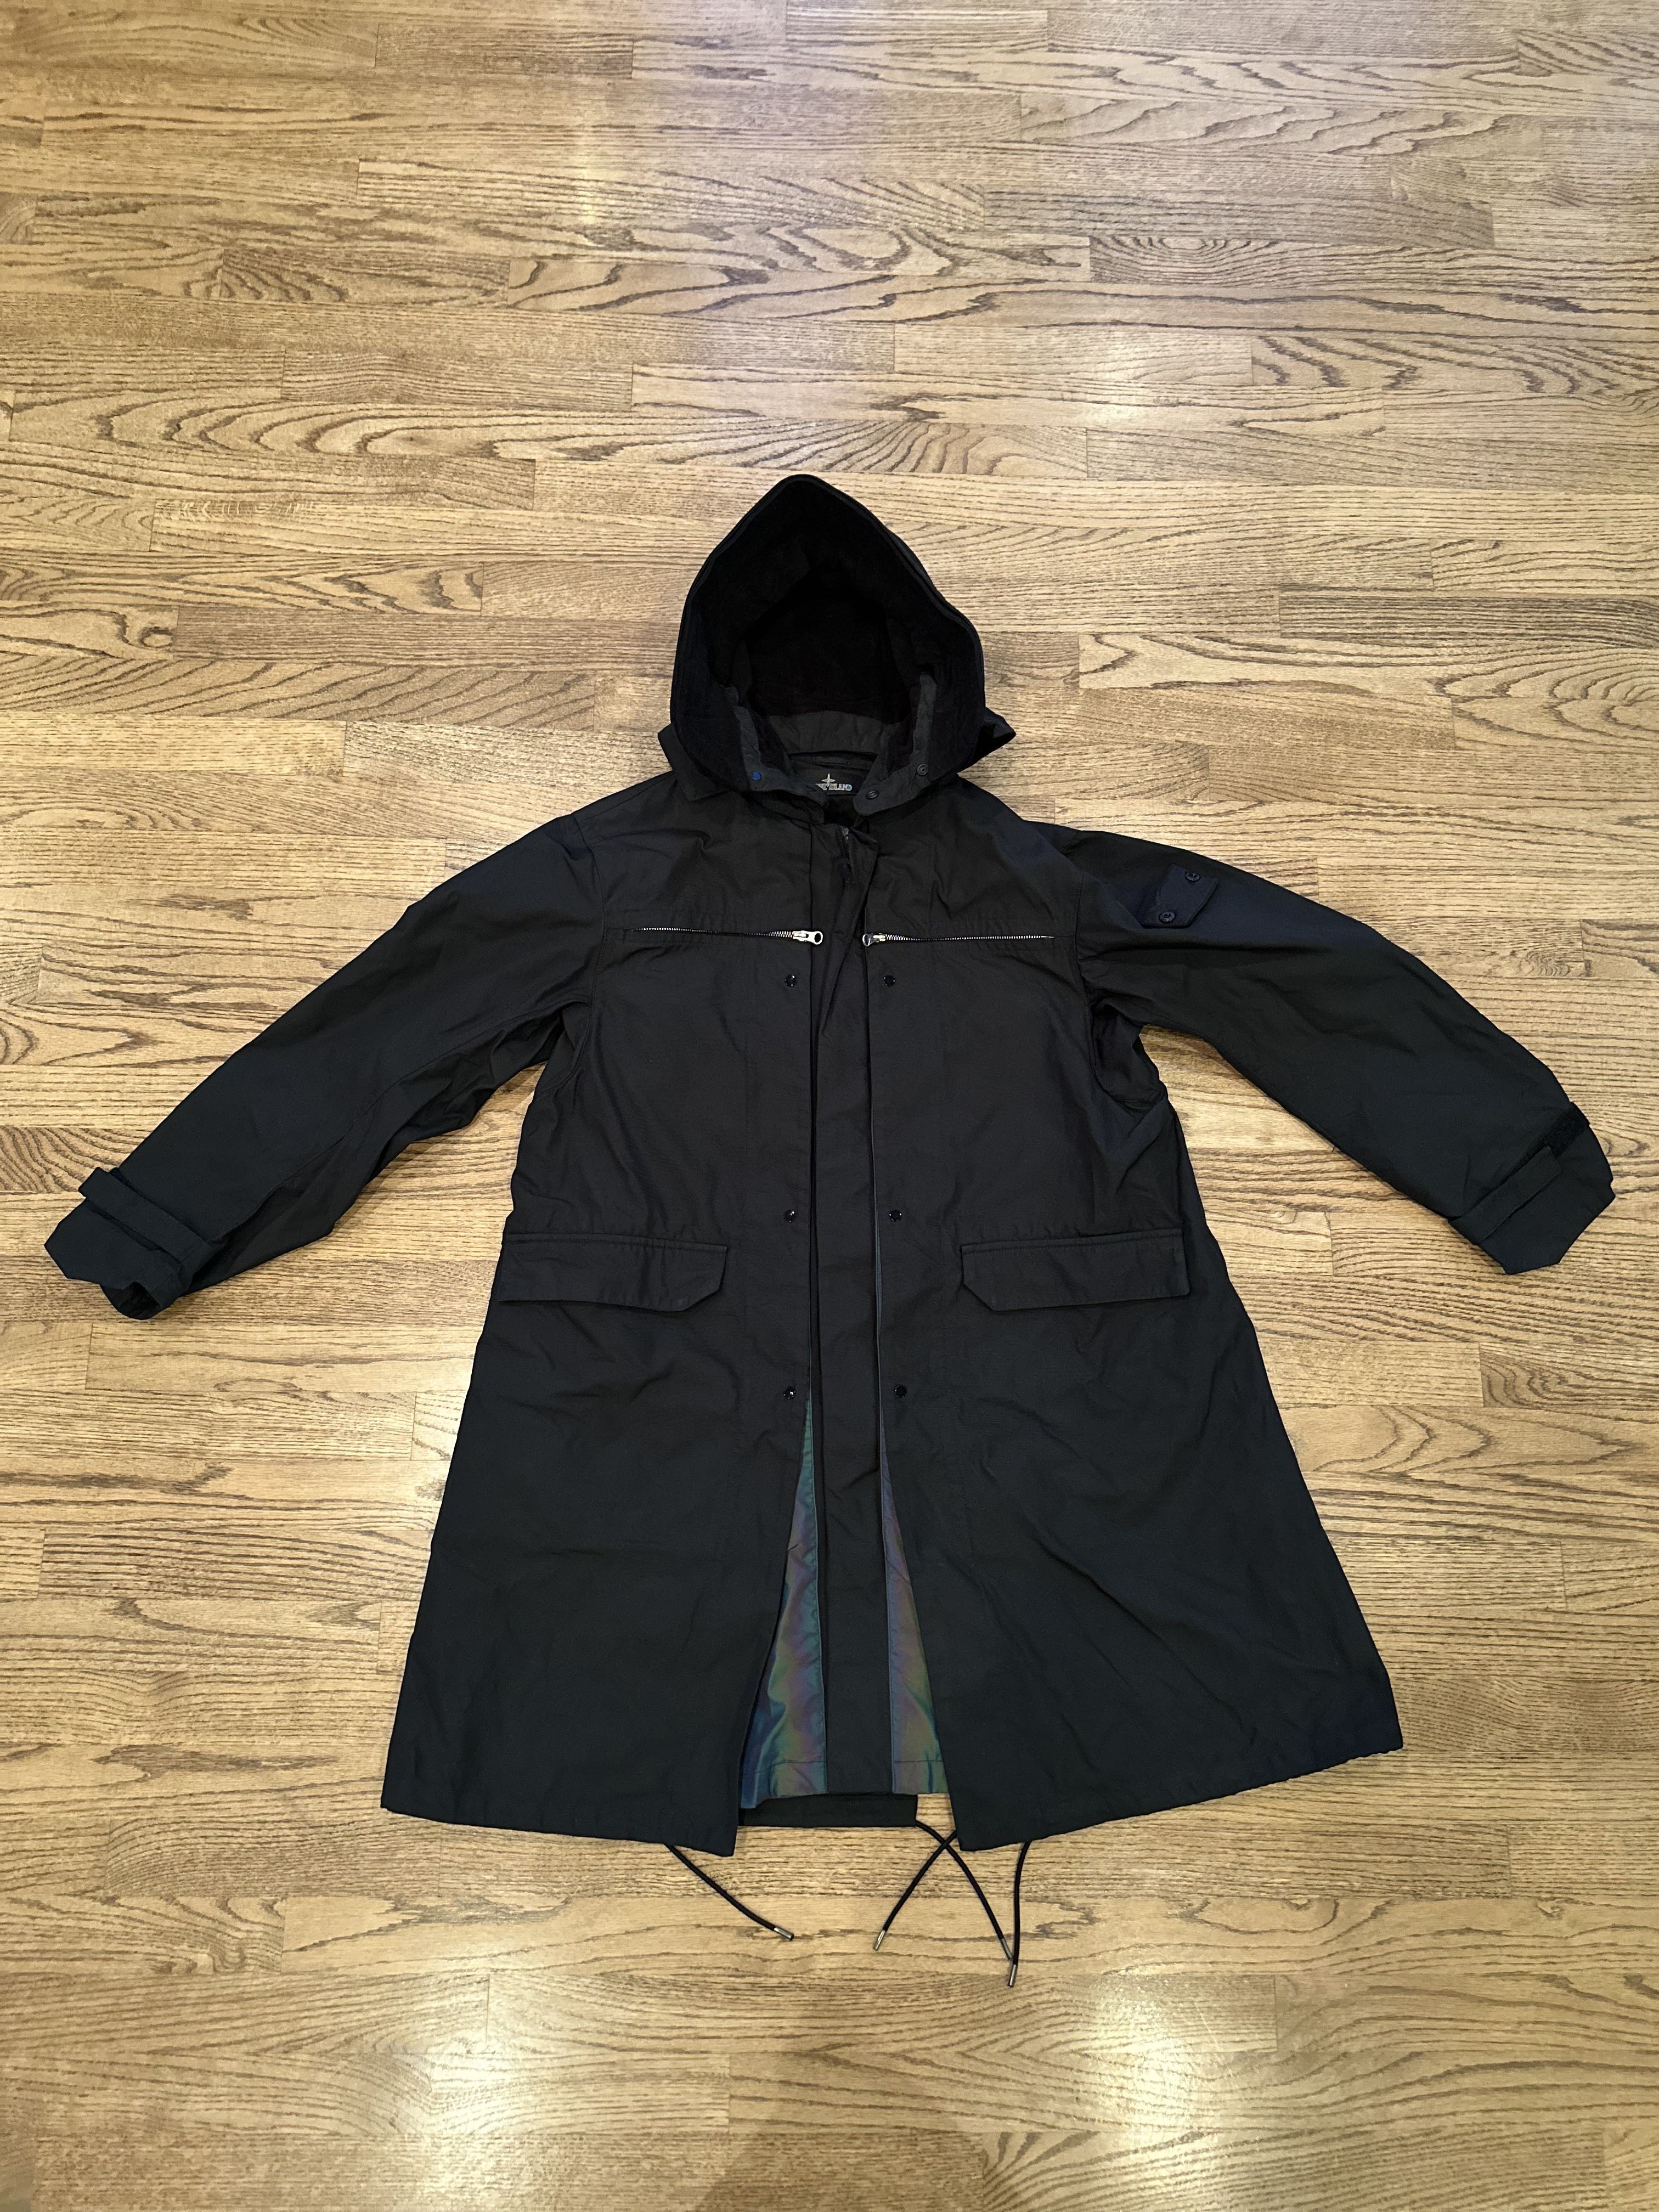 10th Anniversary Scarabeo Stealth Parka - 1